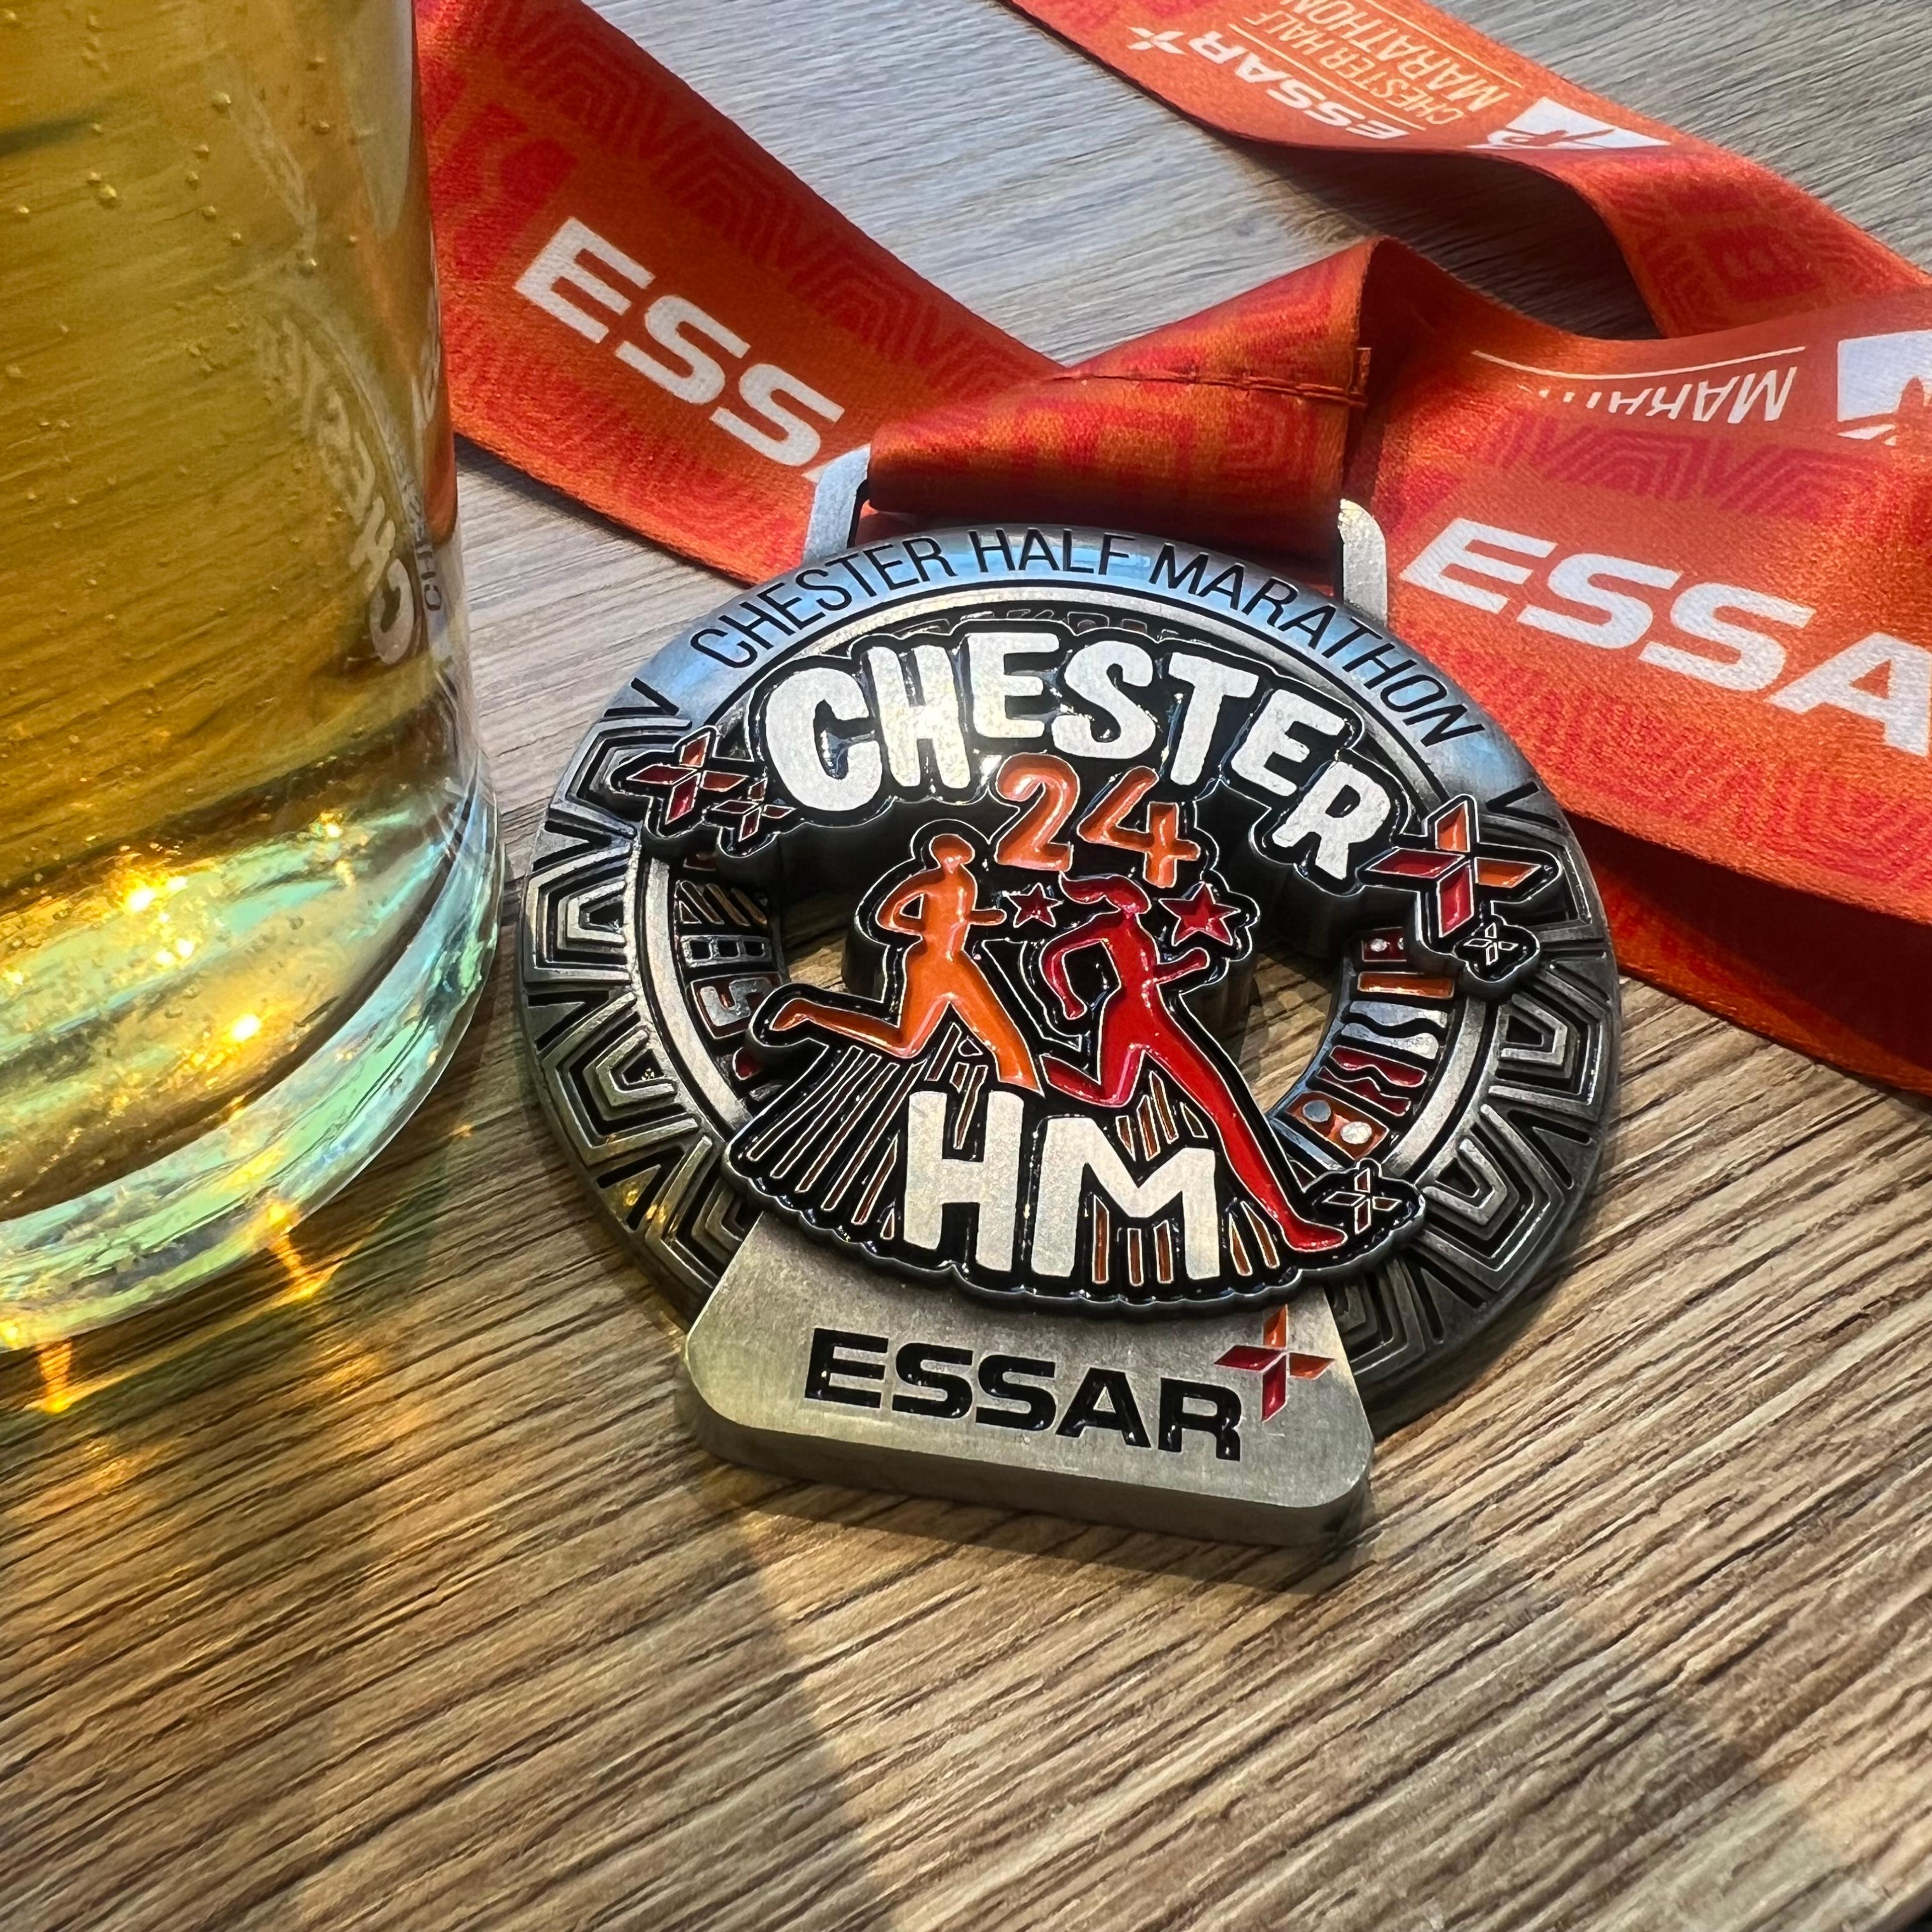 A medal and a beer. Pizza en-route!